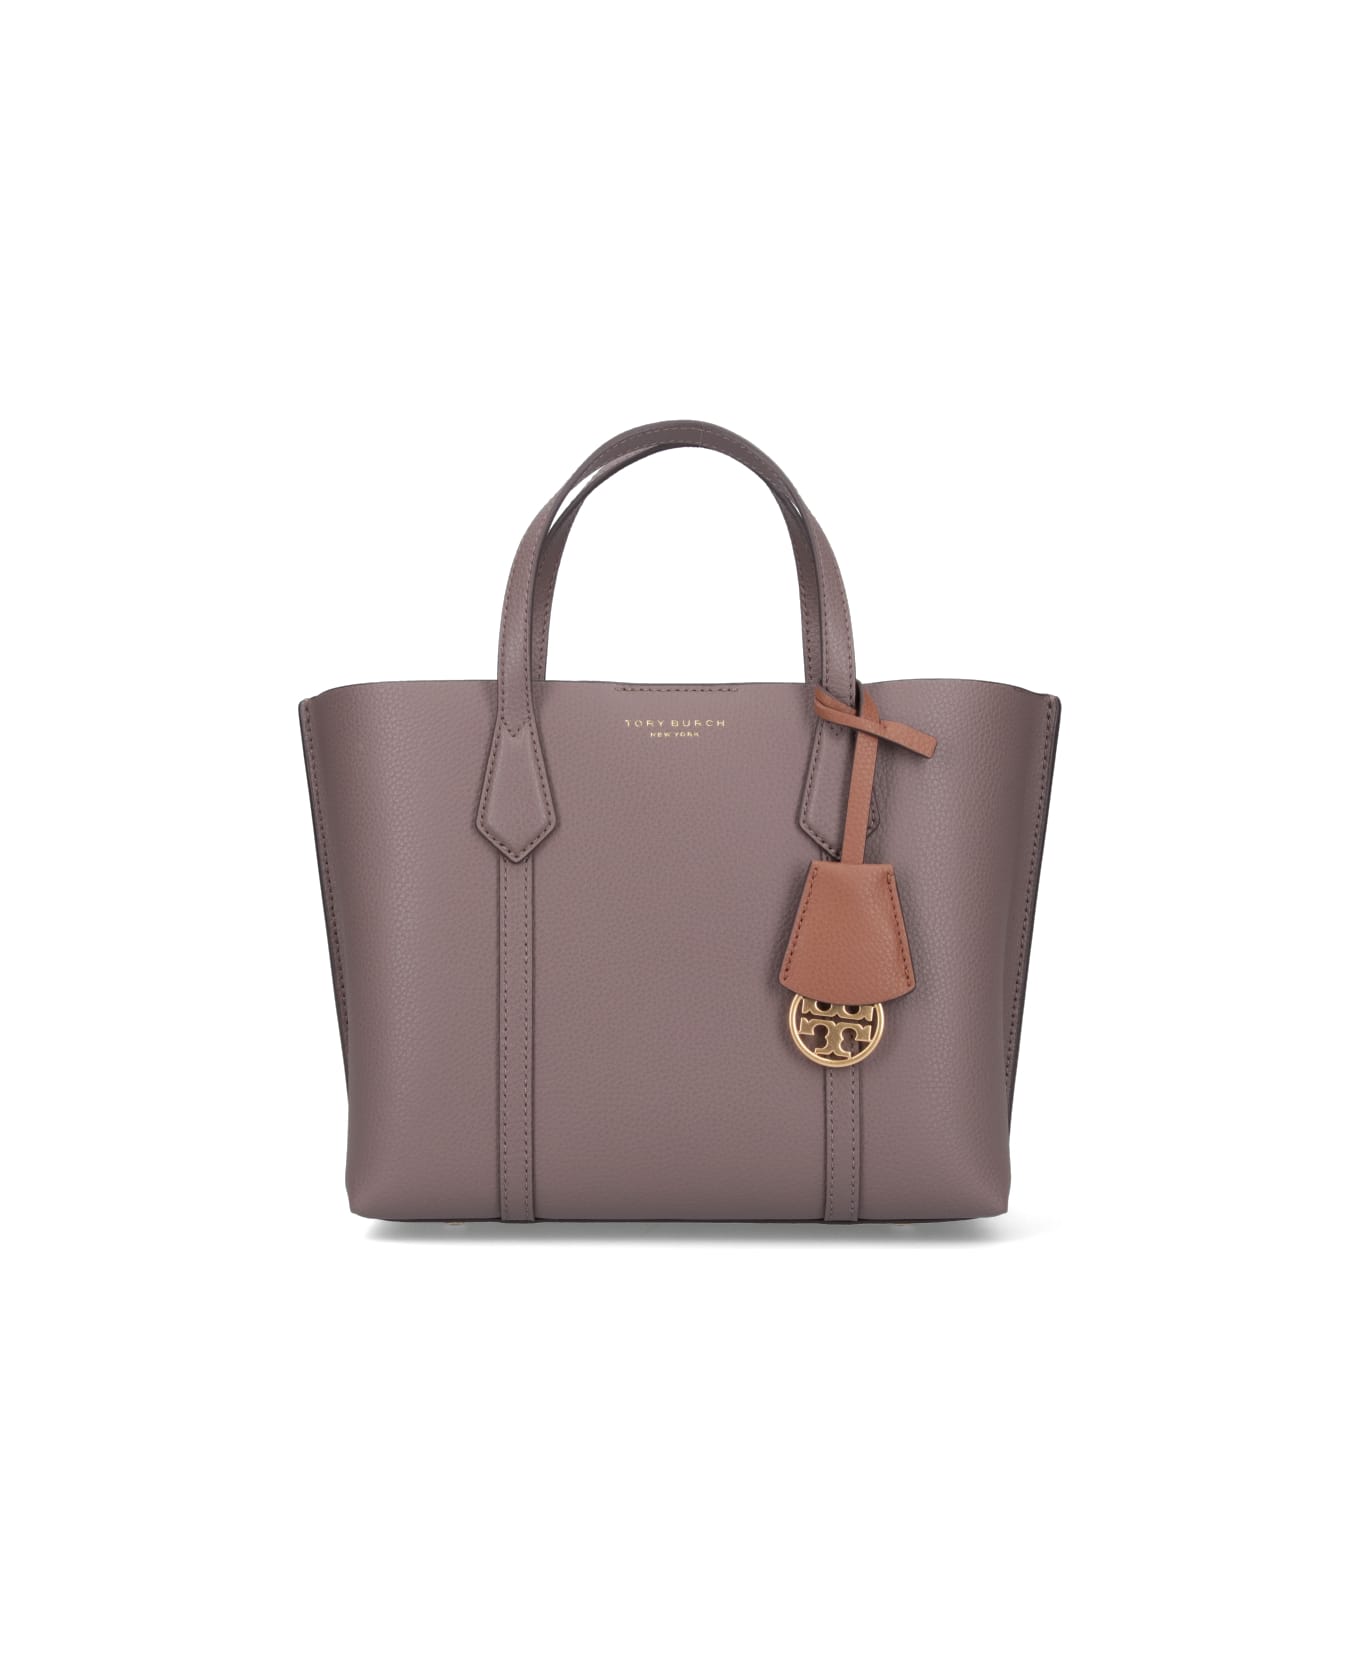 Tory Burch Small Tote Bag "perry" - Taupe